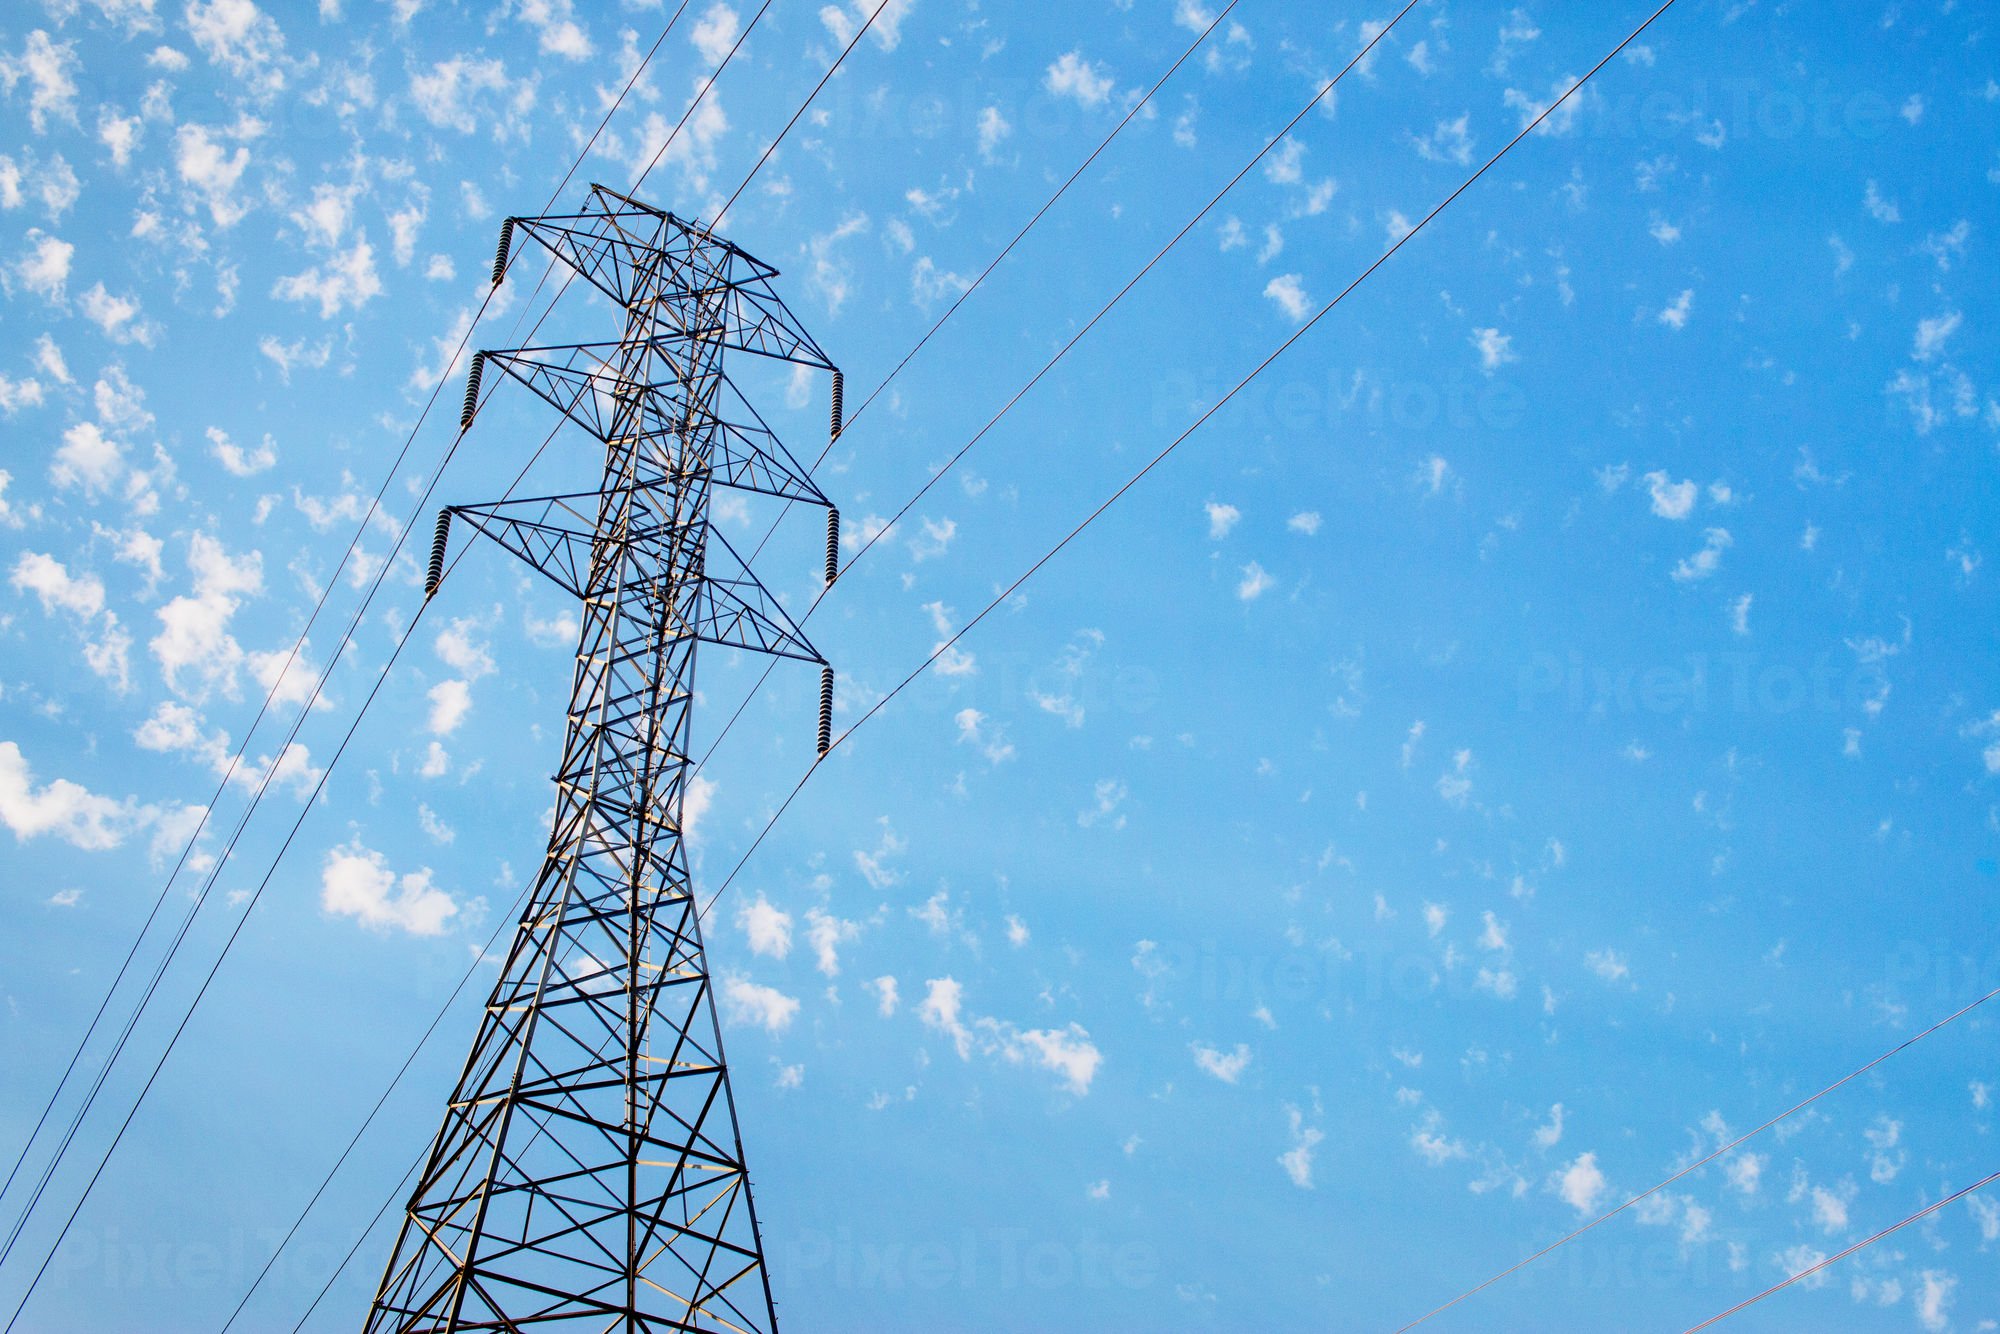 View Of A Transmission Tower With Power Lines Against Blue Sky Stock Photo Pixeltote